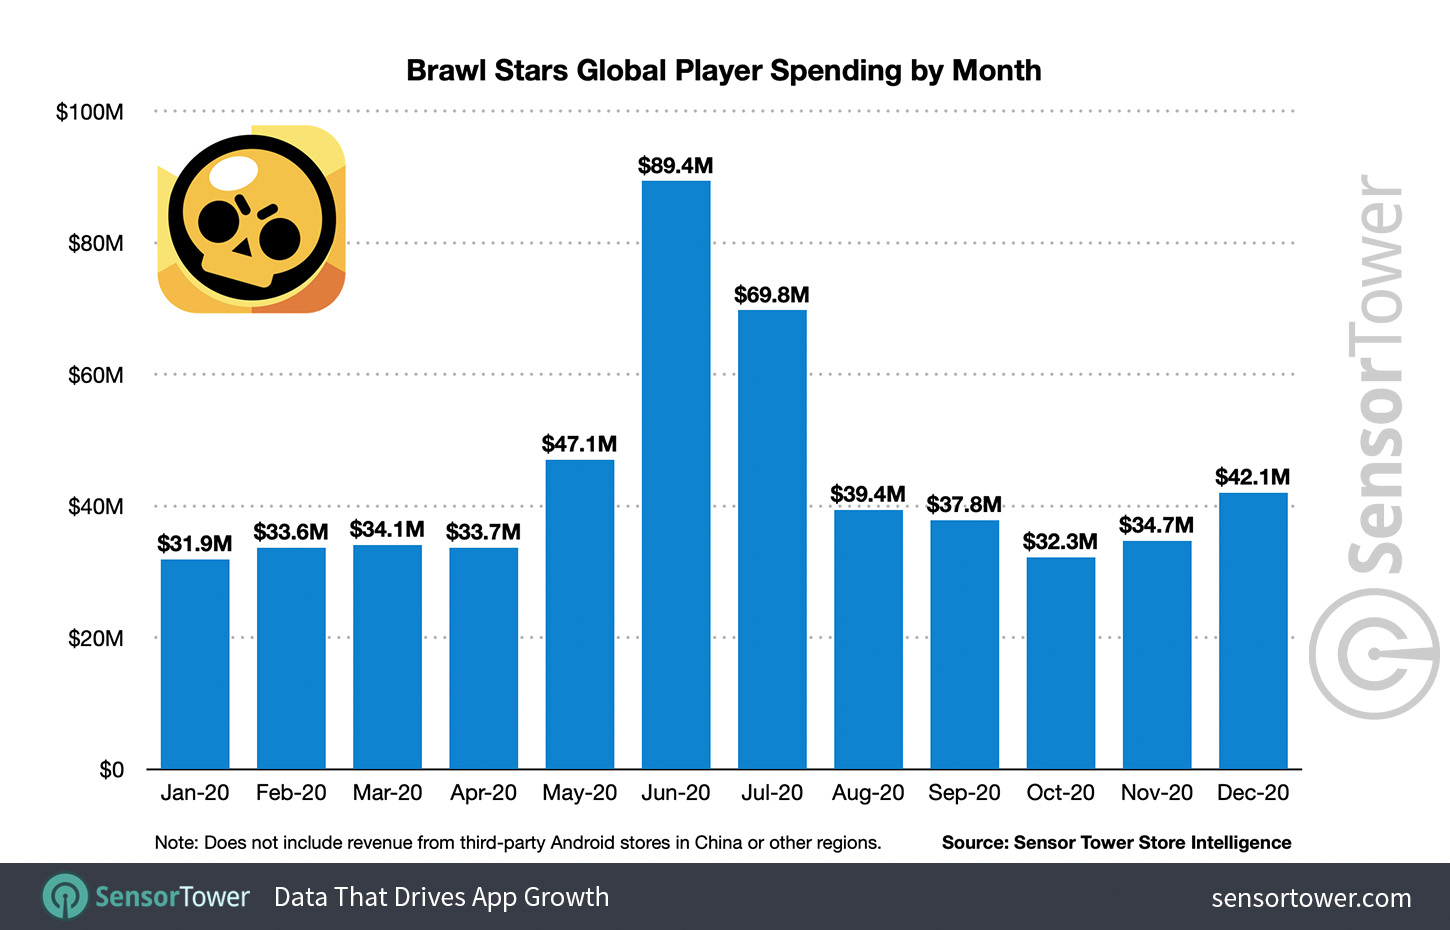 Brawl Stars Global Player Spending by Month